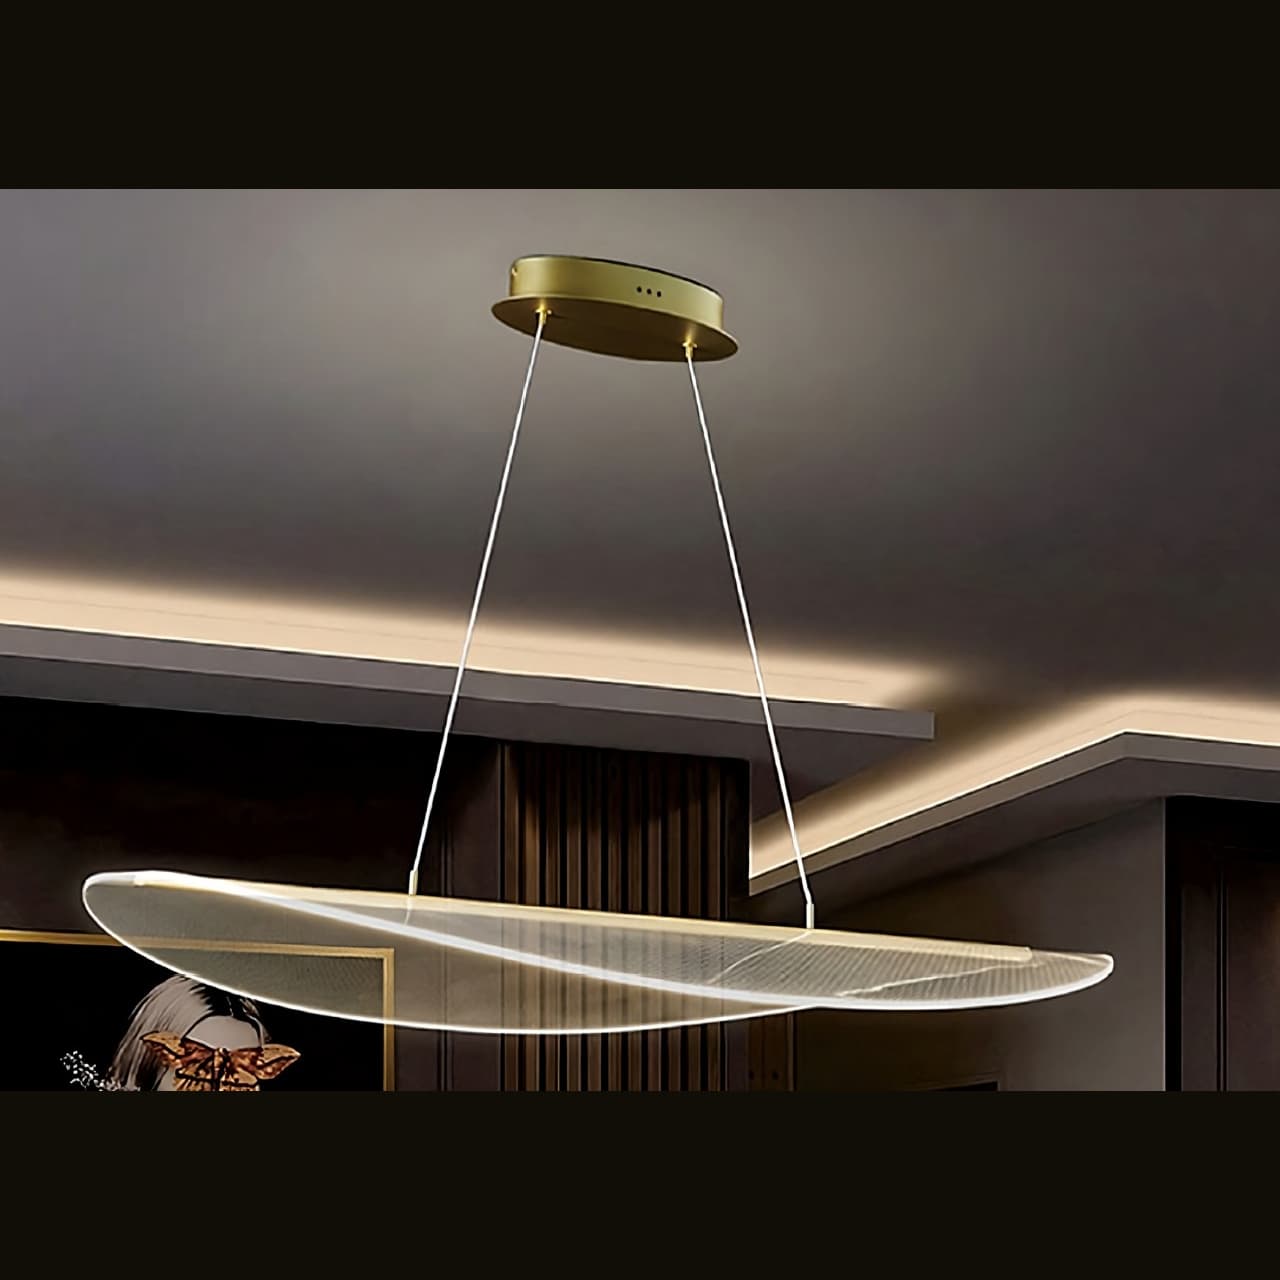 Product image of a vergato linear pendant hanging in a dining room